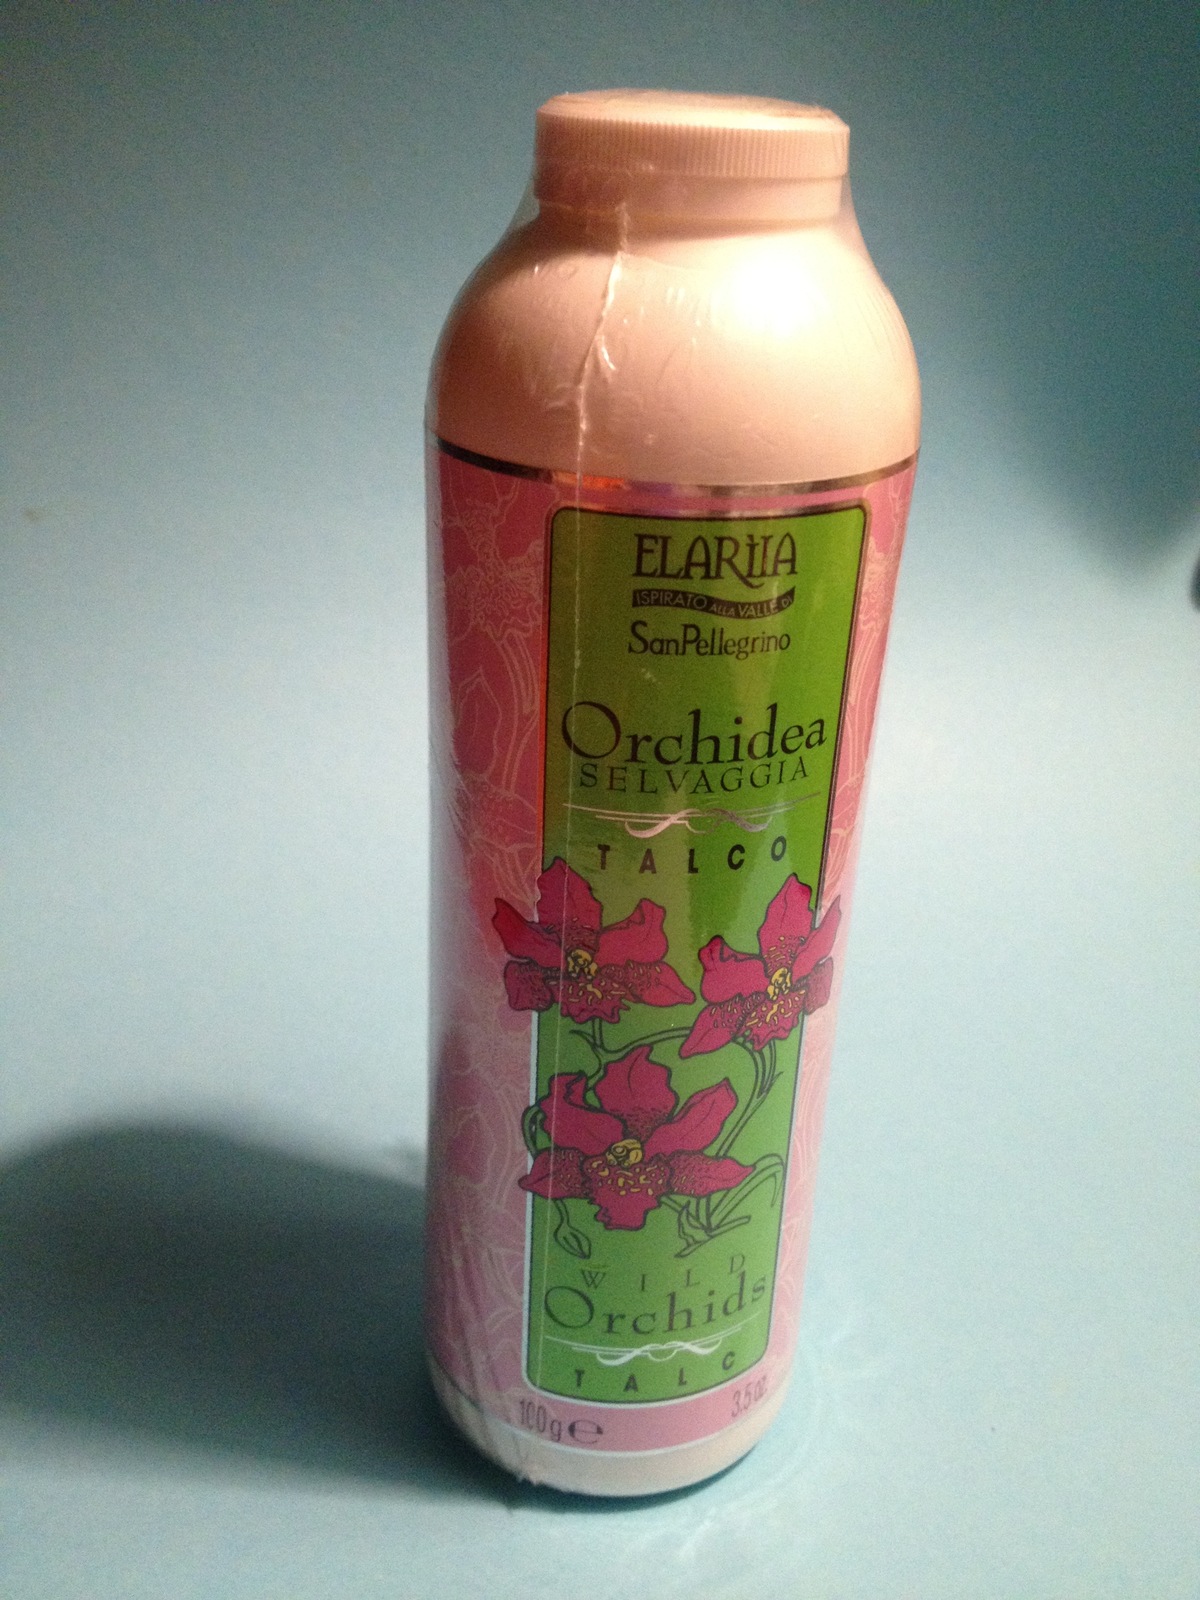 ELARIIA Perlier "Wild Orchids" TALC 3.5 oz - made in Italy - NEW, SEALED  - $15.00